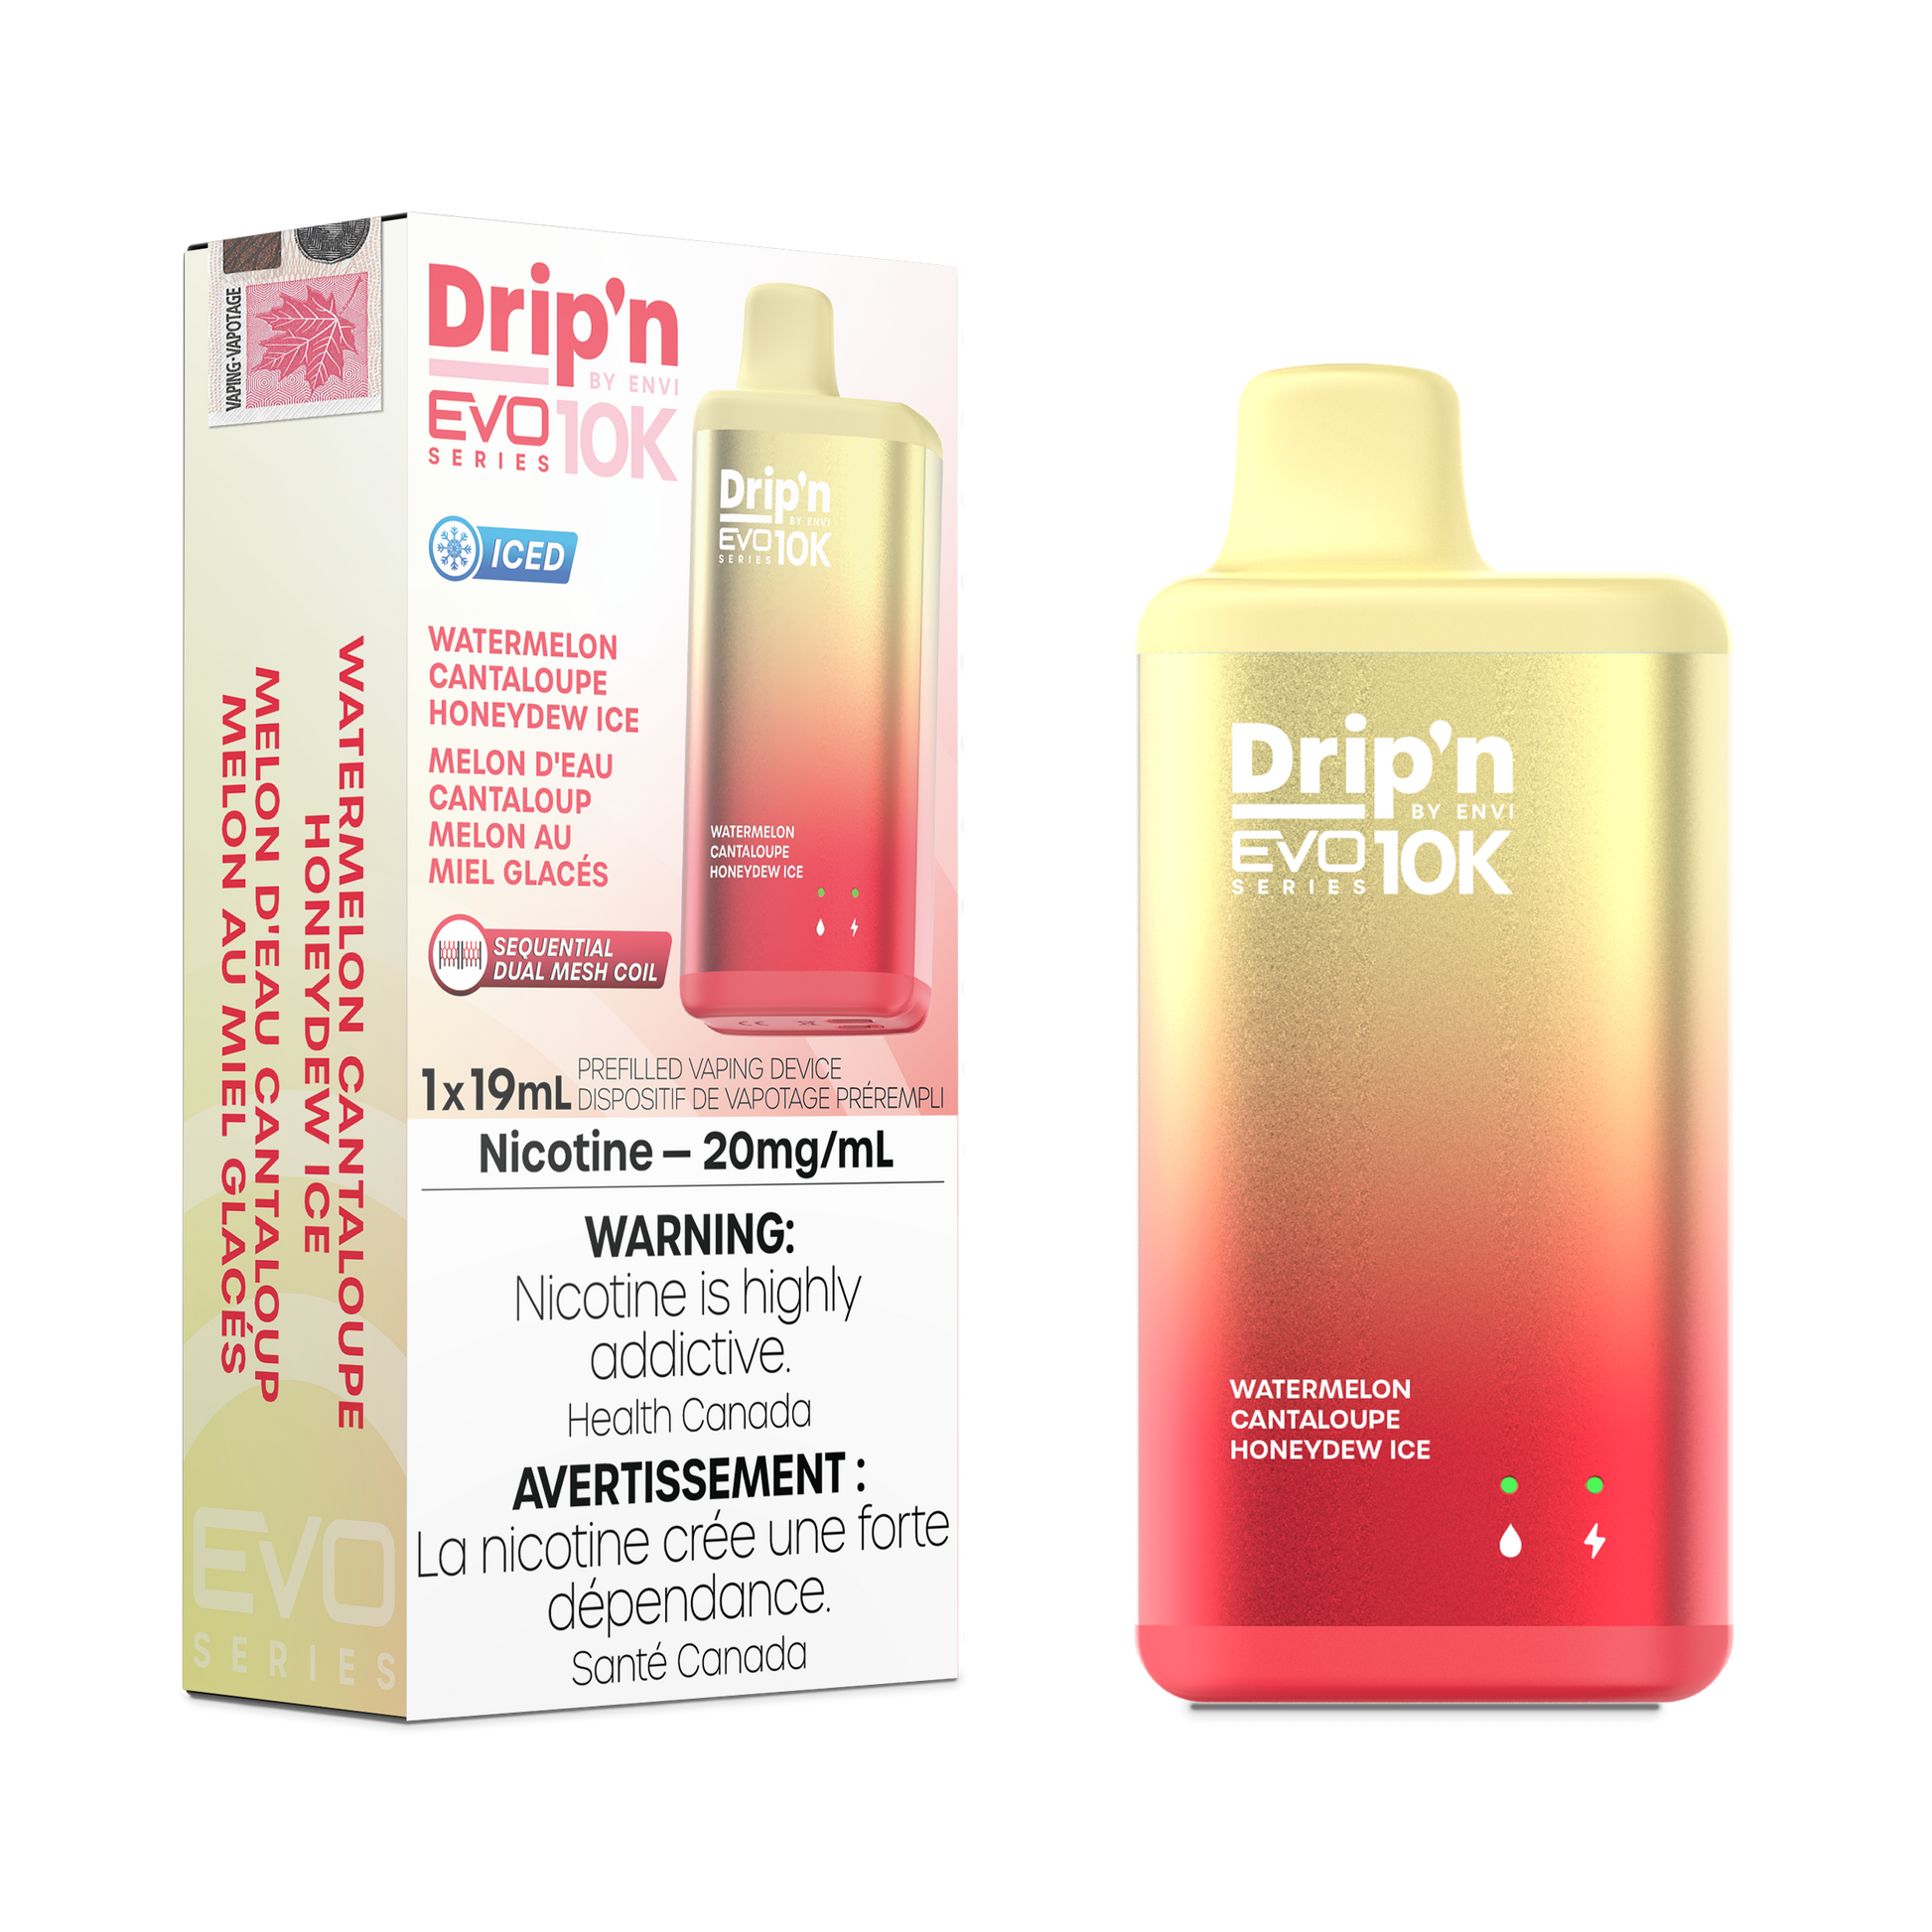 Envi Drip'n EVO 10K Watermelon Cantaloupe Honeydew Ice Disposable Vape - Online Vape Shop Canada - Quebec and BC Shipping Available